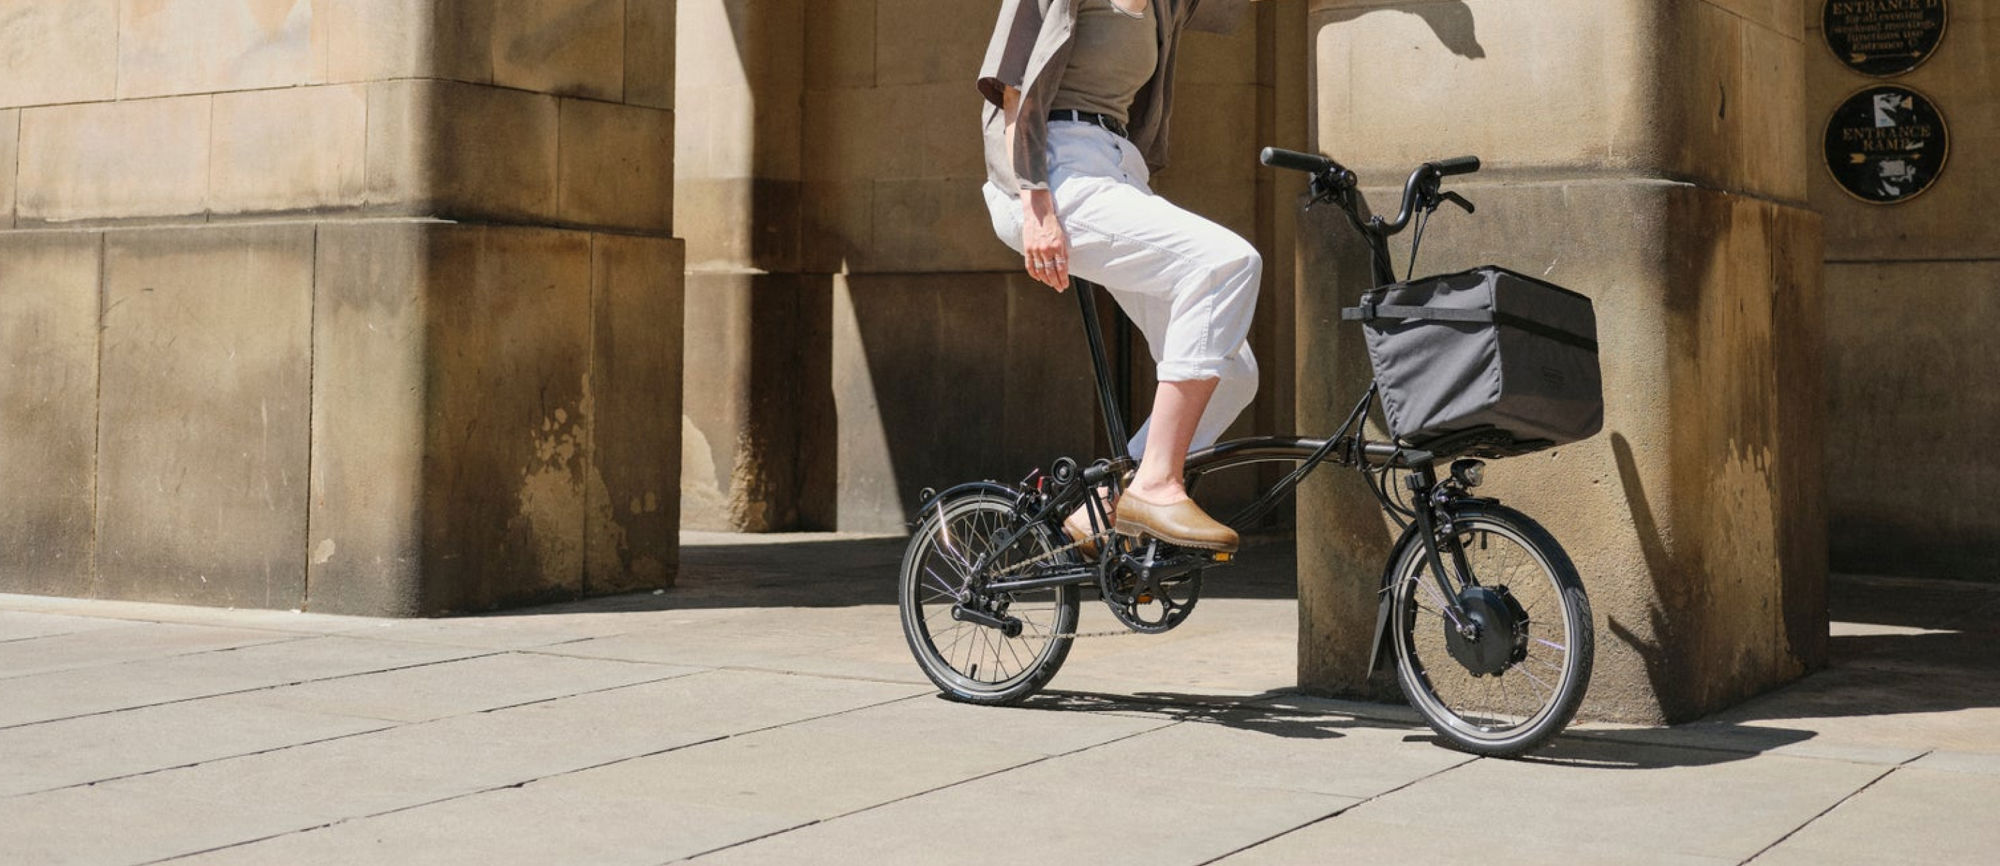 A new partnership unfolds: Enjoy appointed by Brompton Bicycles